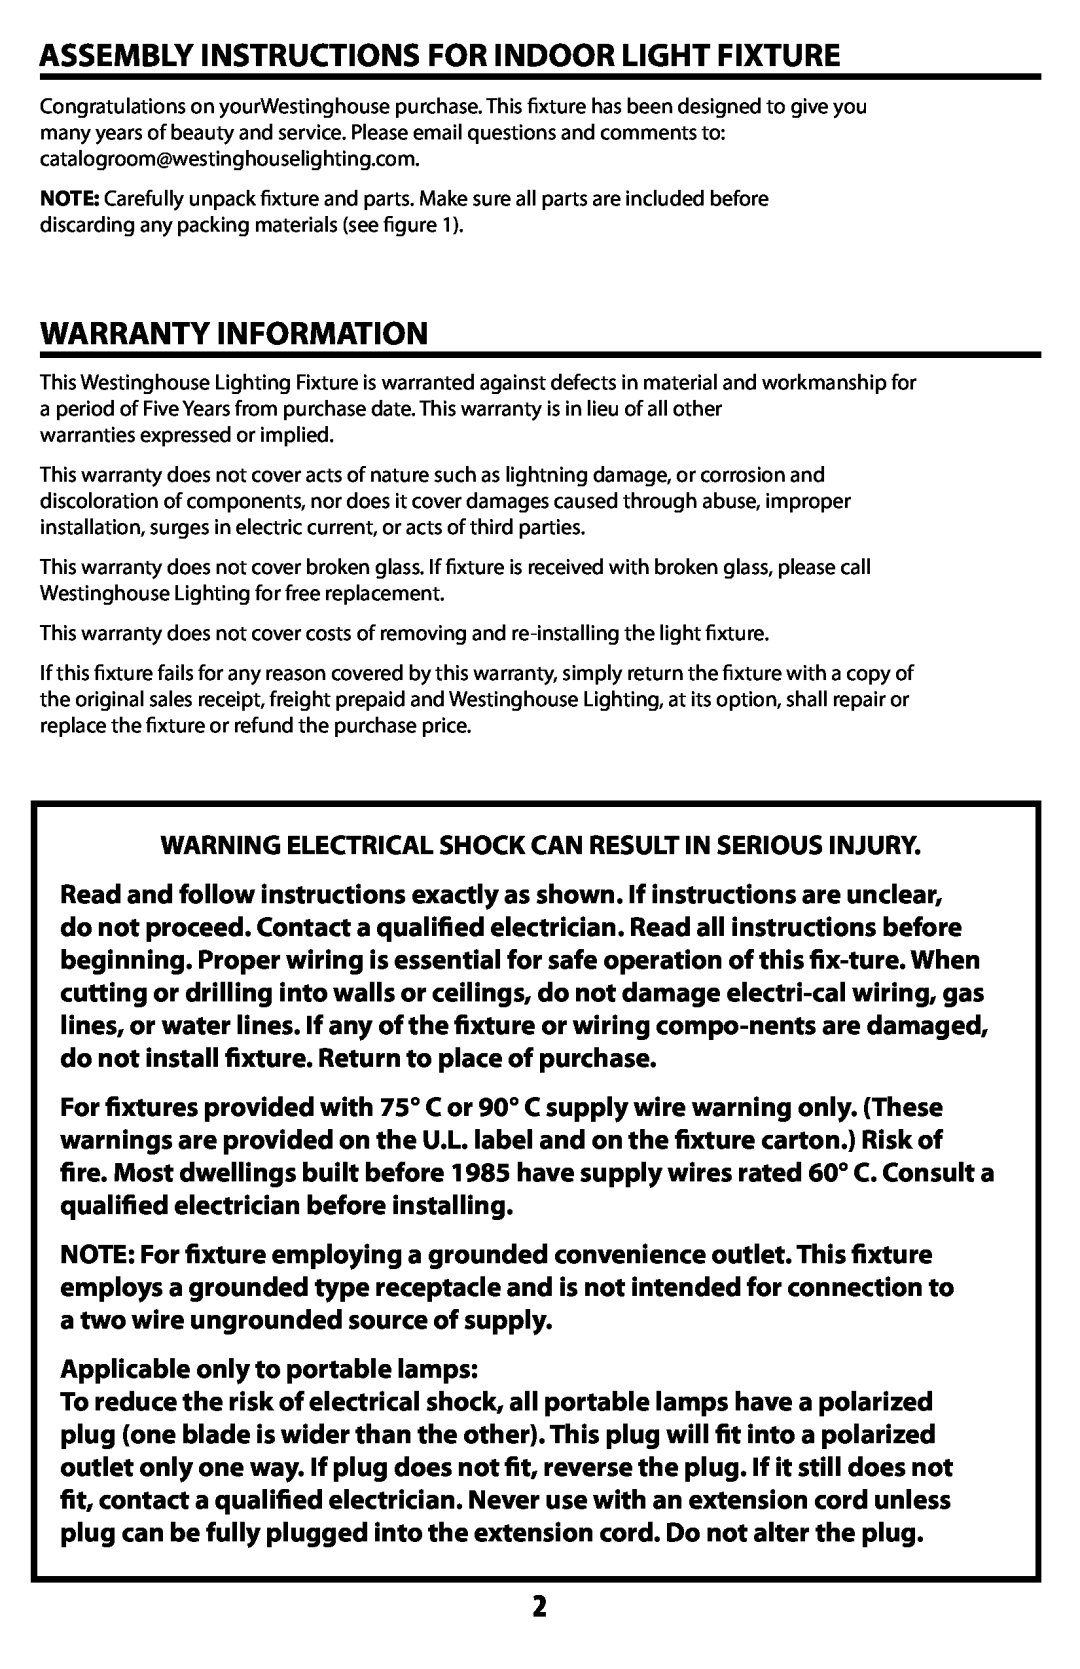 Westinghouse W-351 owner manual Assembly Instructions For Indoor Light Fixture, Warranty Information 